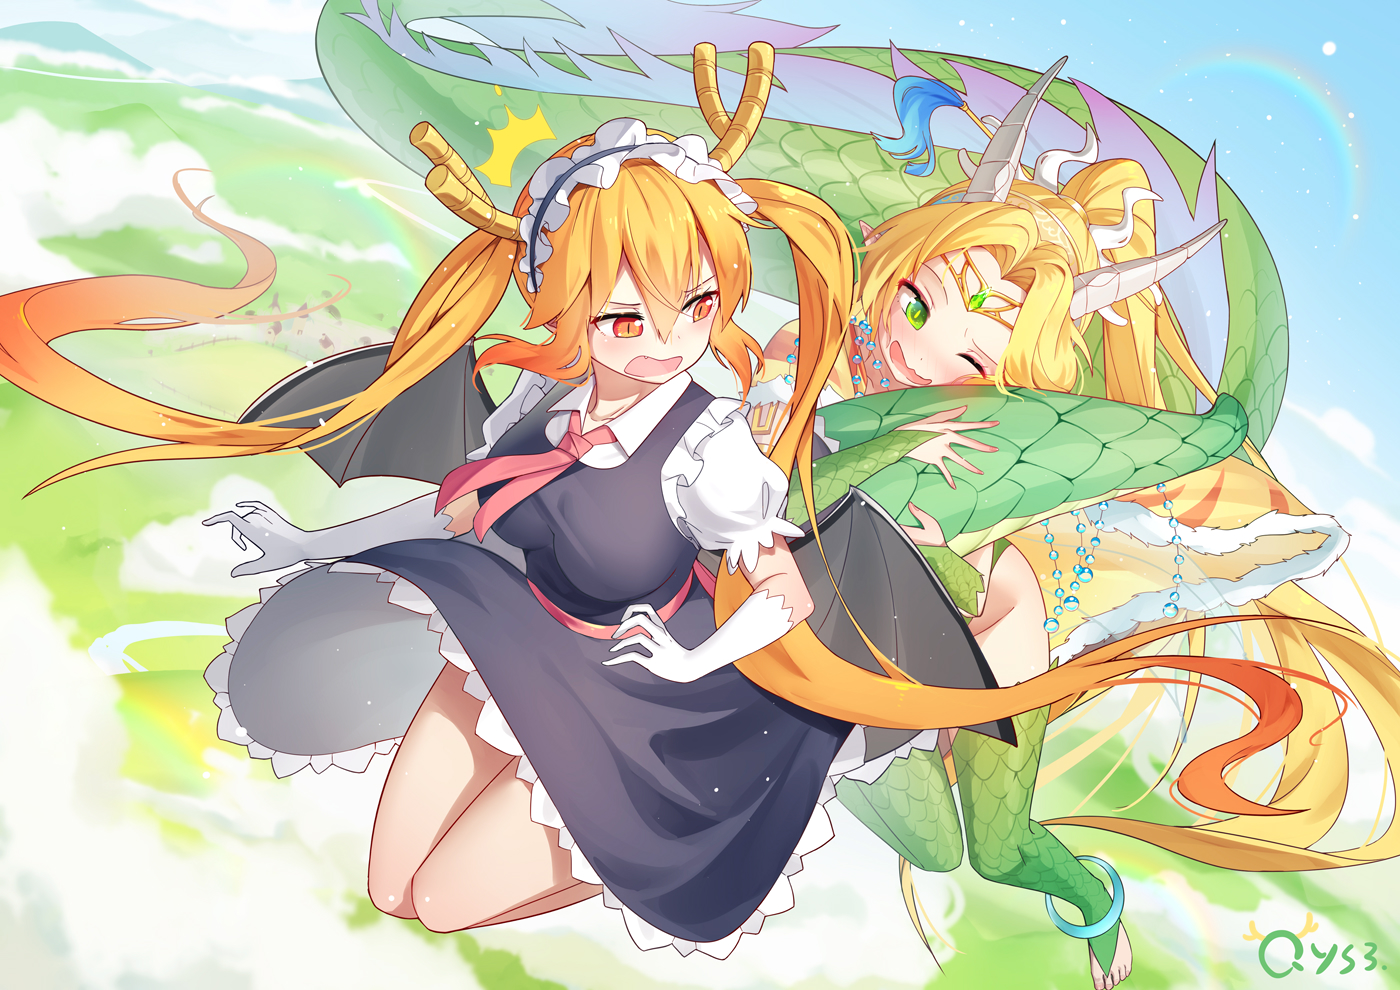 Dragon Maid of Miss Kobayashi: Charge Forward! Launch of the PC version of the shooting game Choro-gon via Steam in October